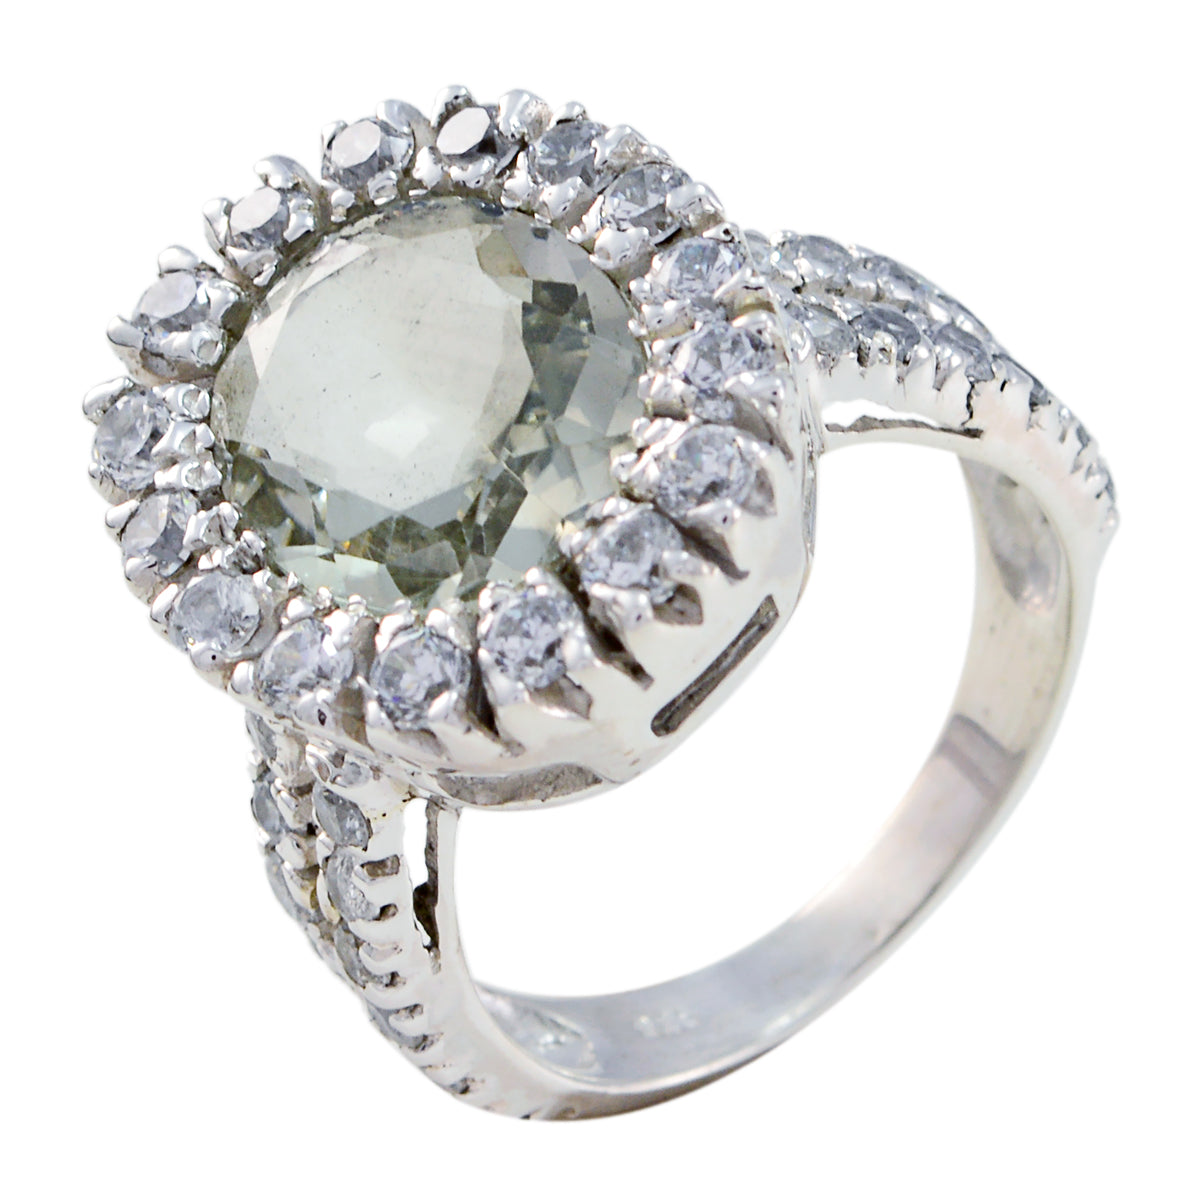 Well-Favoured Gem Green Amethyst Solid Silver Ring Initial Jewelry